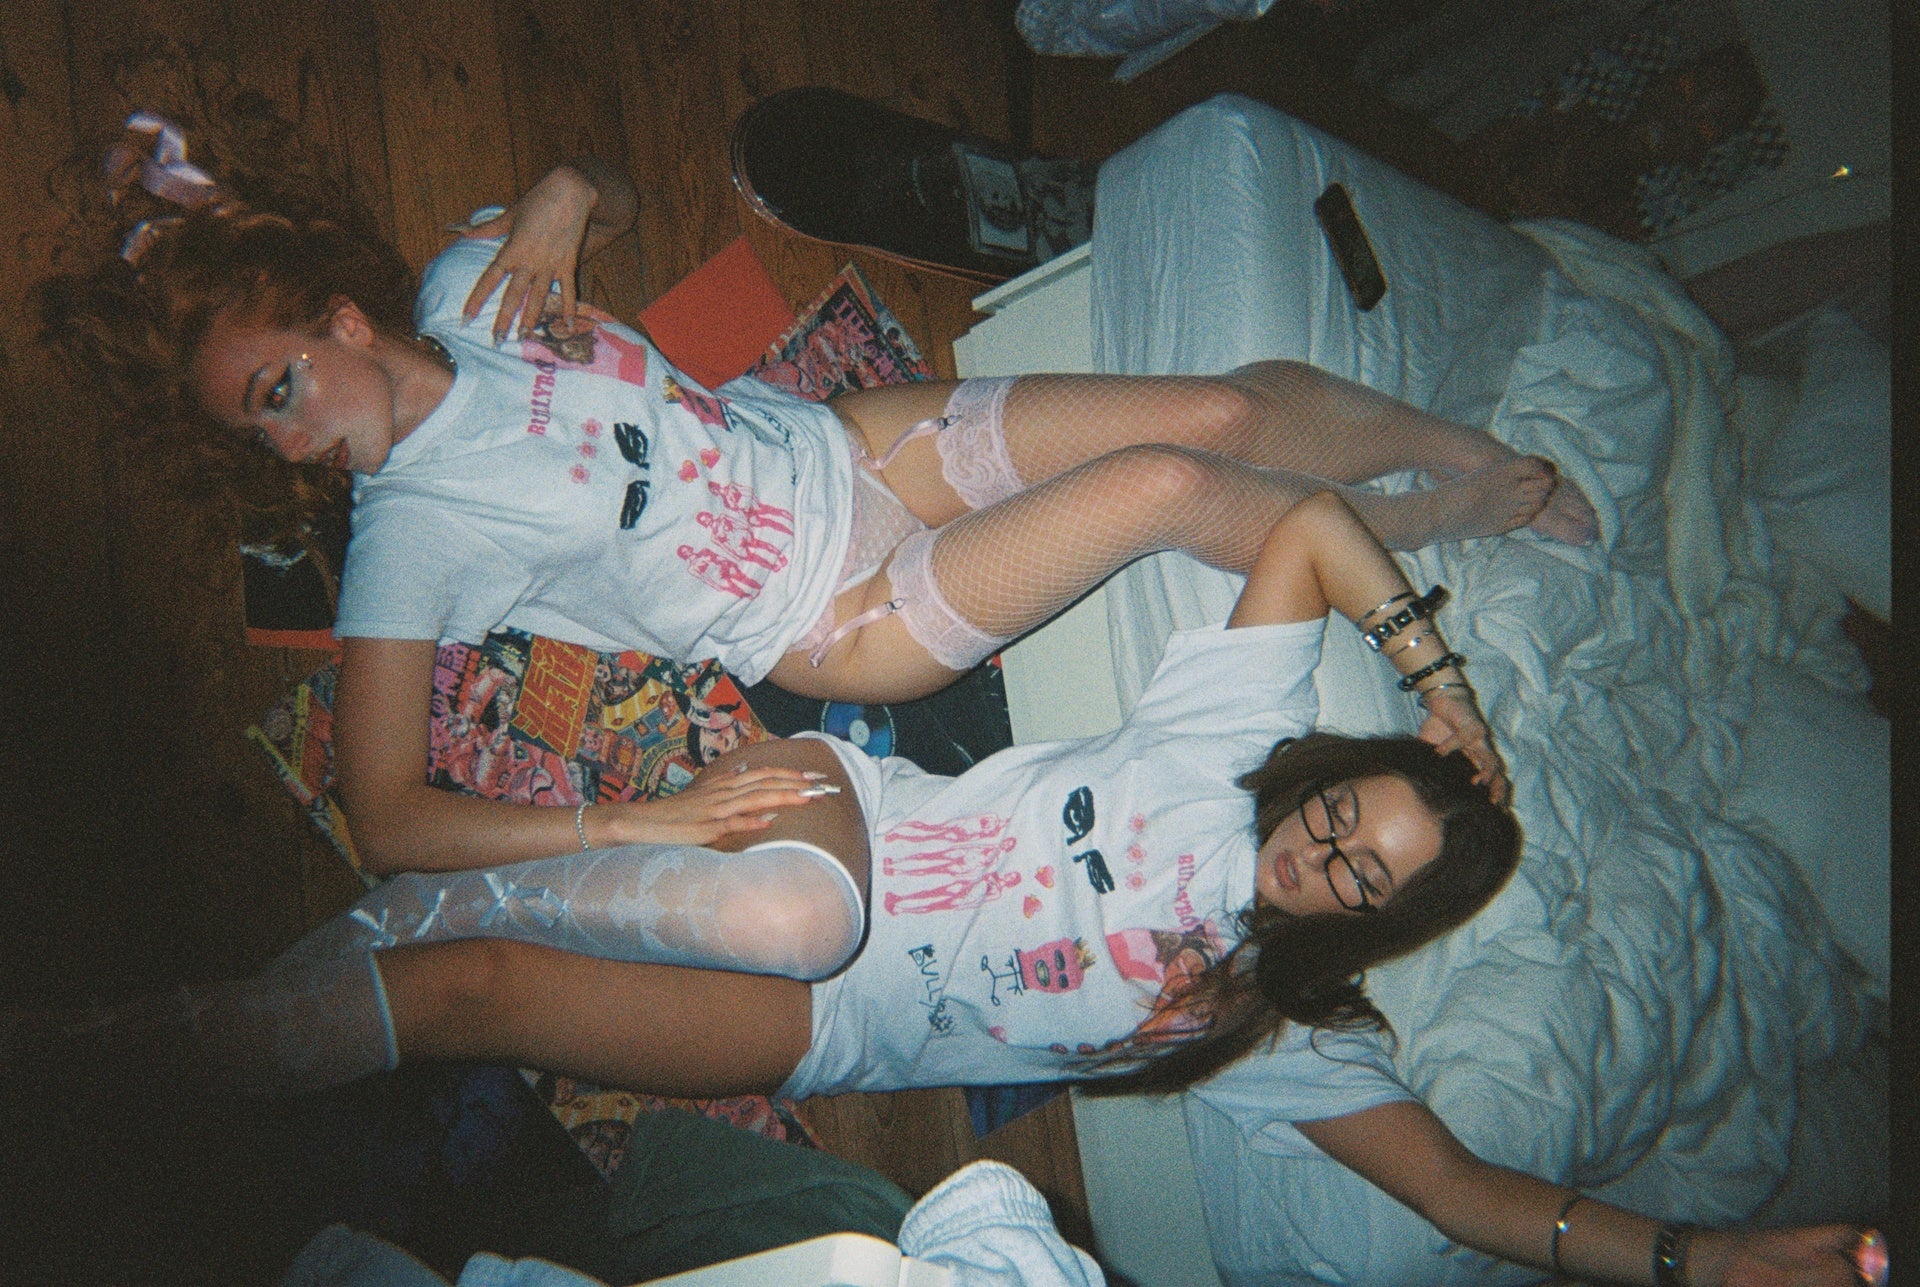 Bullyboy models lying down in a bedroom while wearing the Bullyboy t-shirts